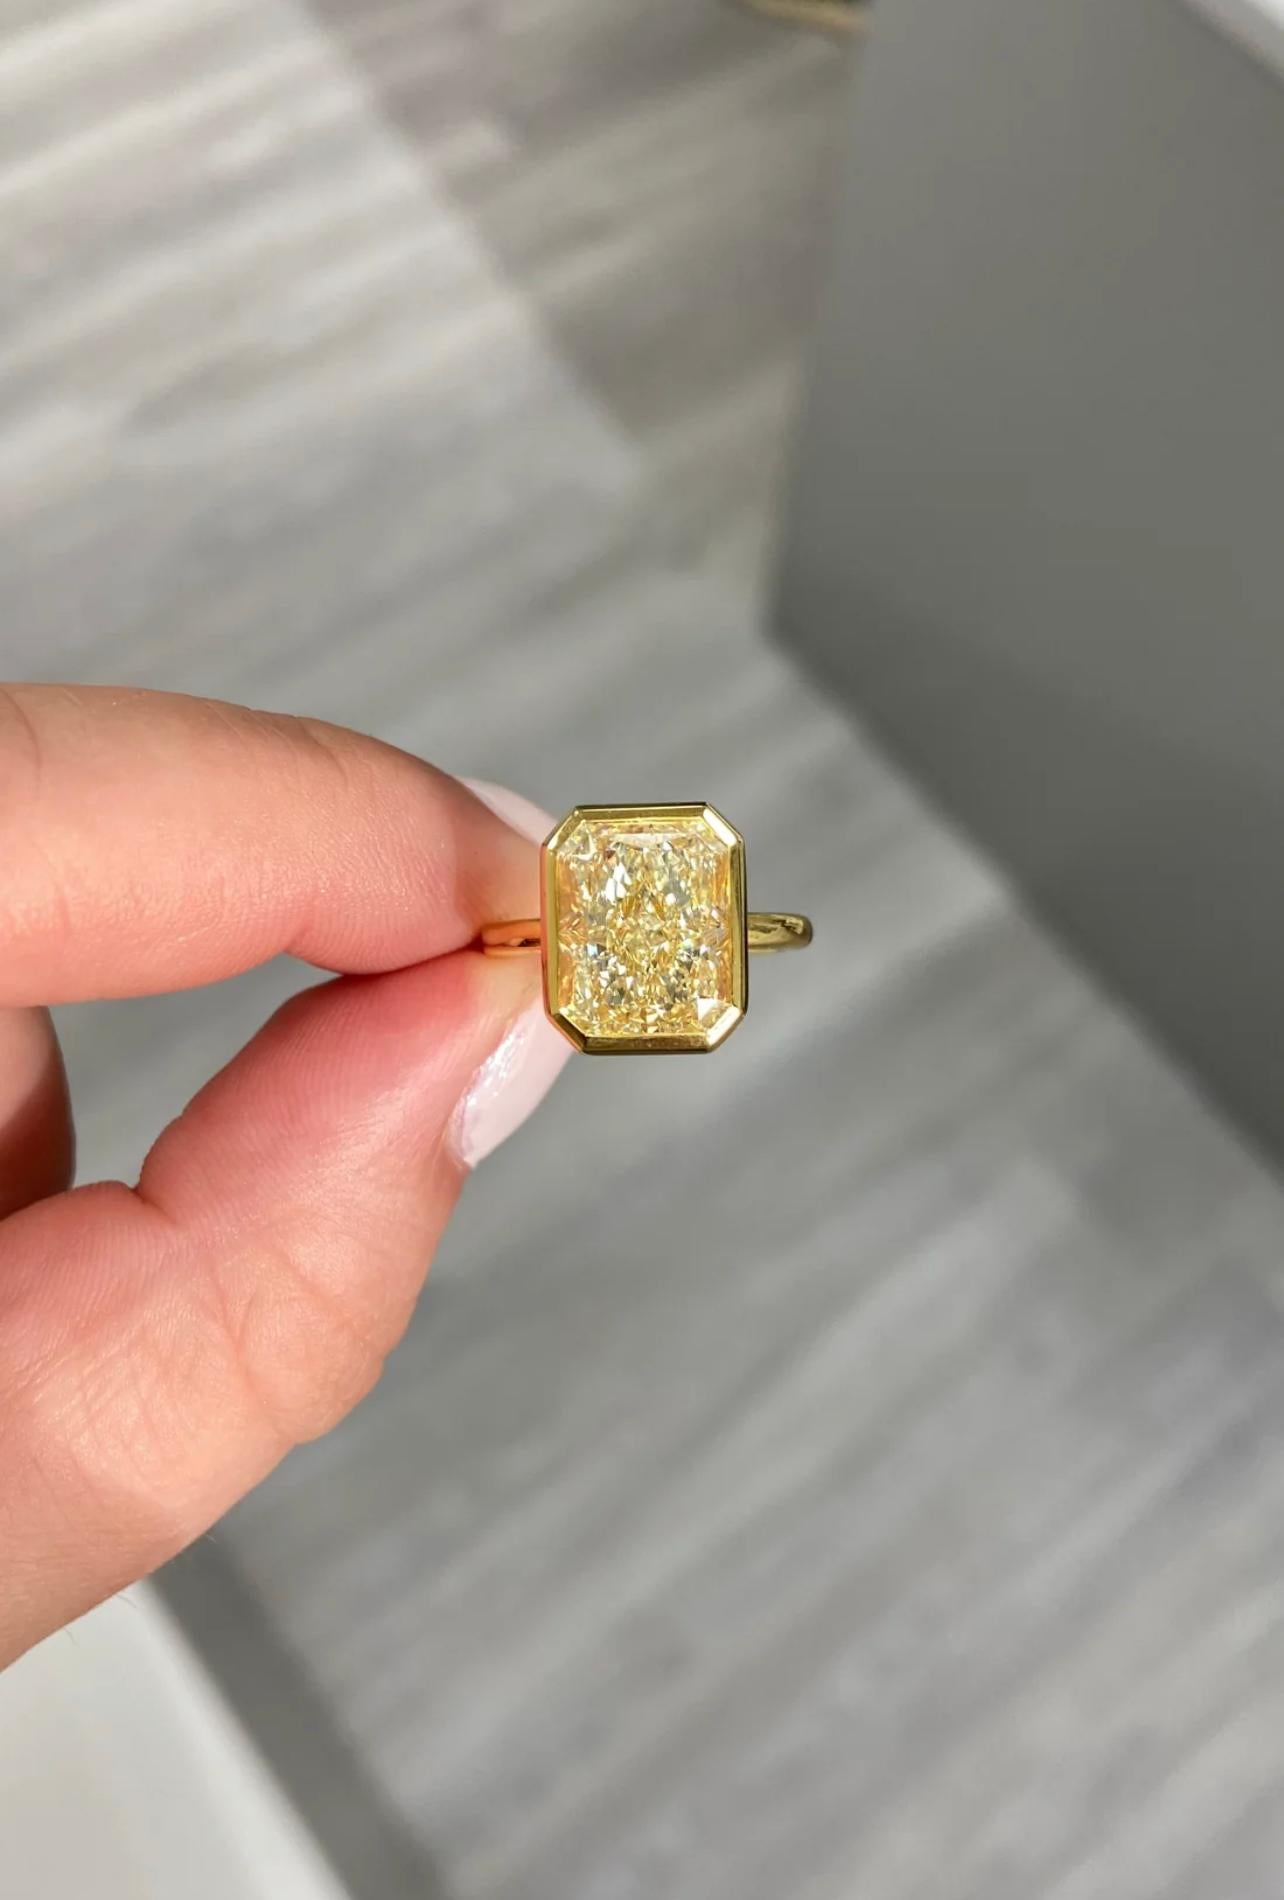 Spready 6ct long radiant certified as a UV color VS clarity
Set in an 18kt Yellow Gold bezel ring to bring out the color with a clean and sleek design 